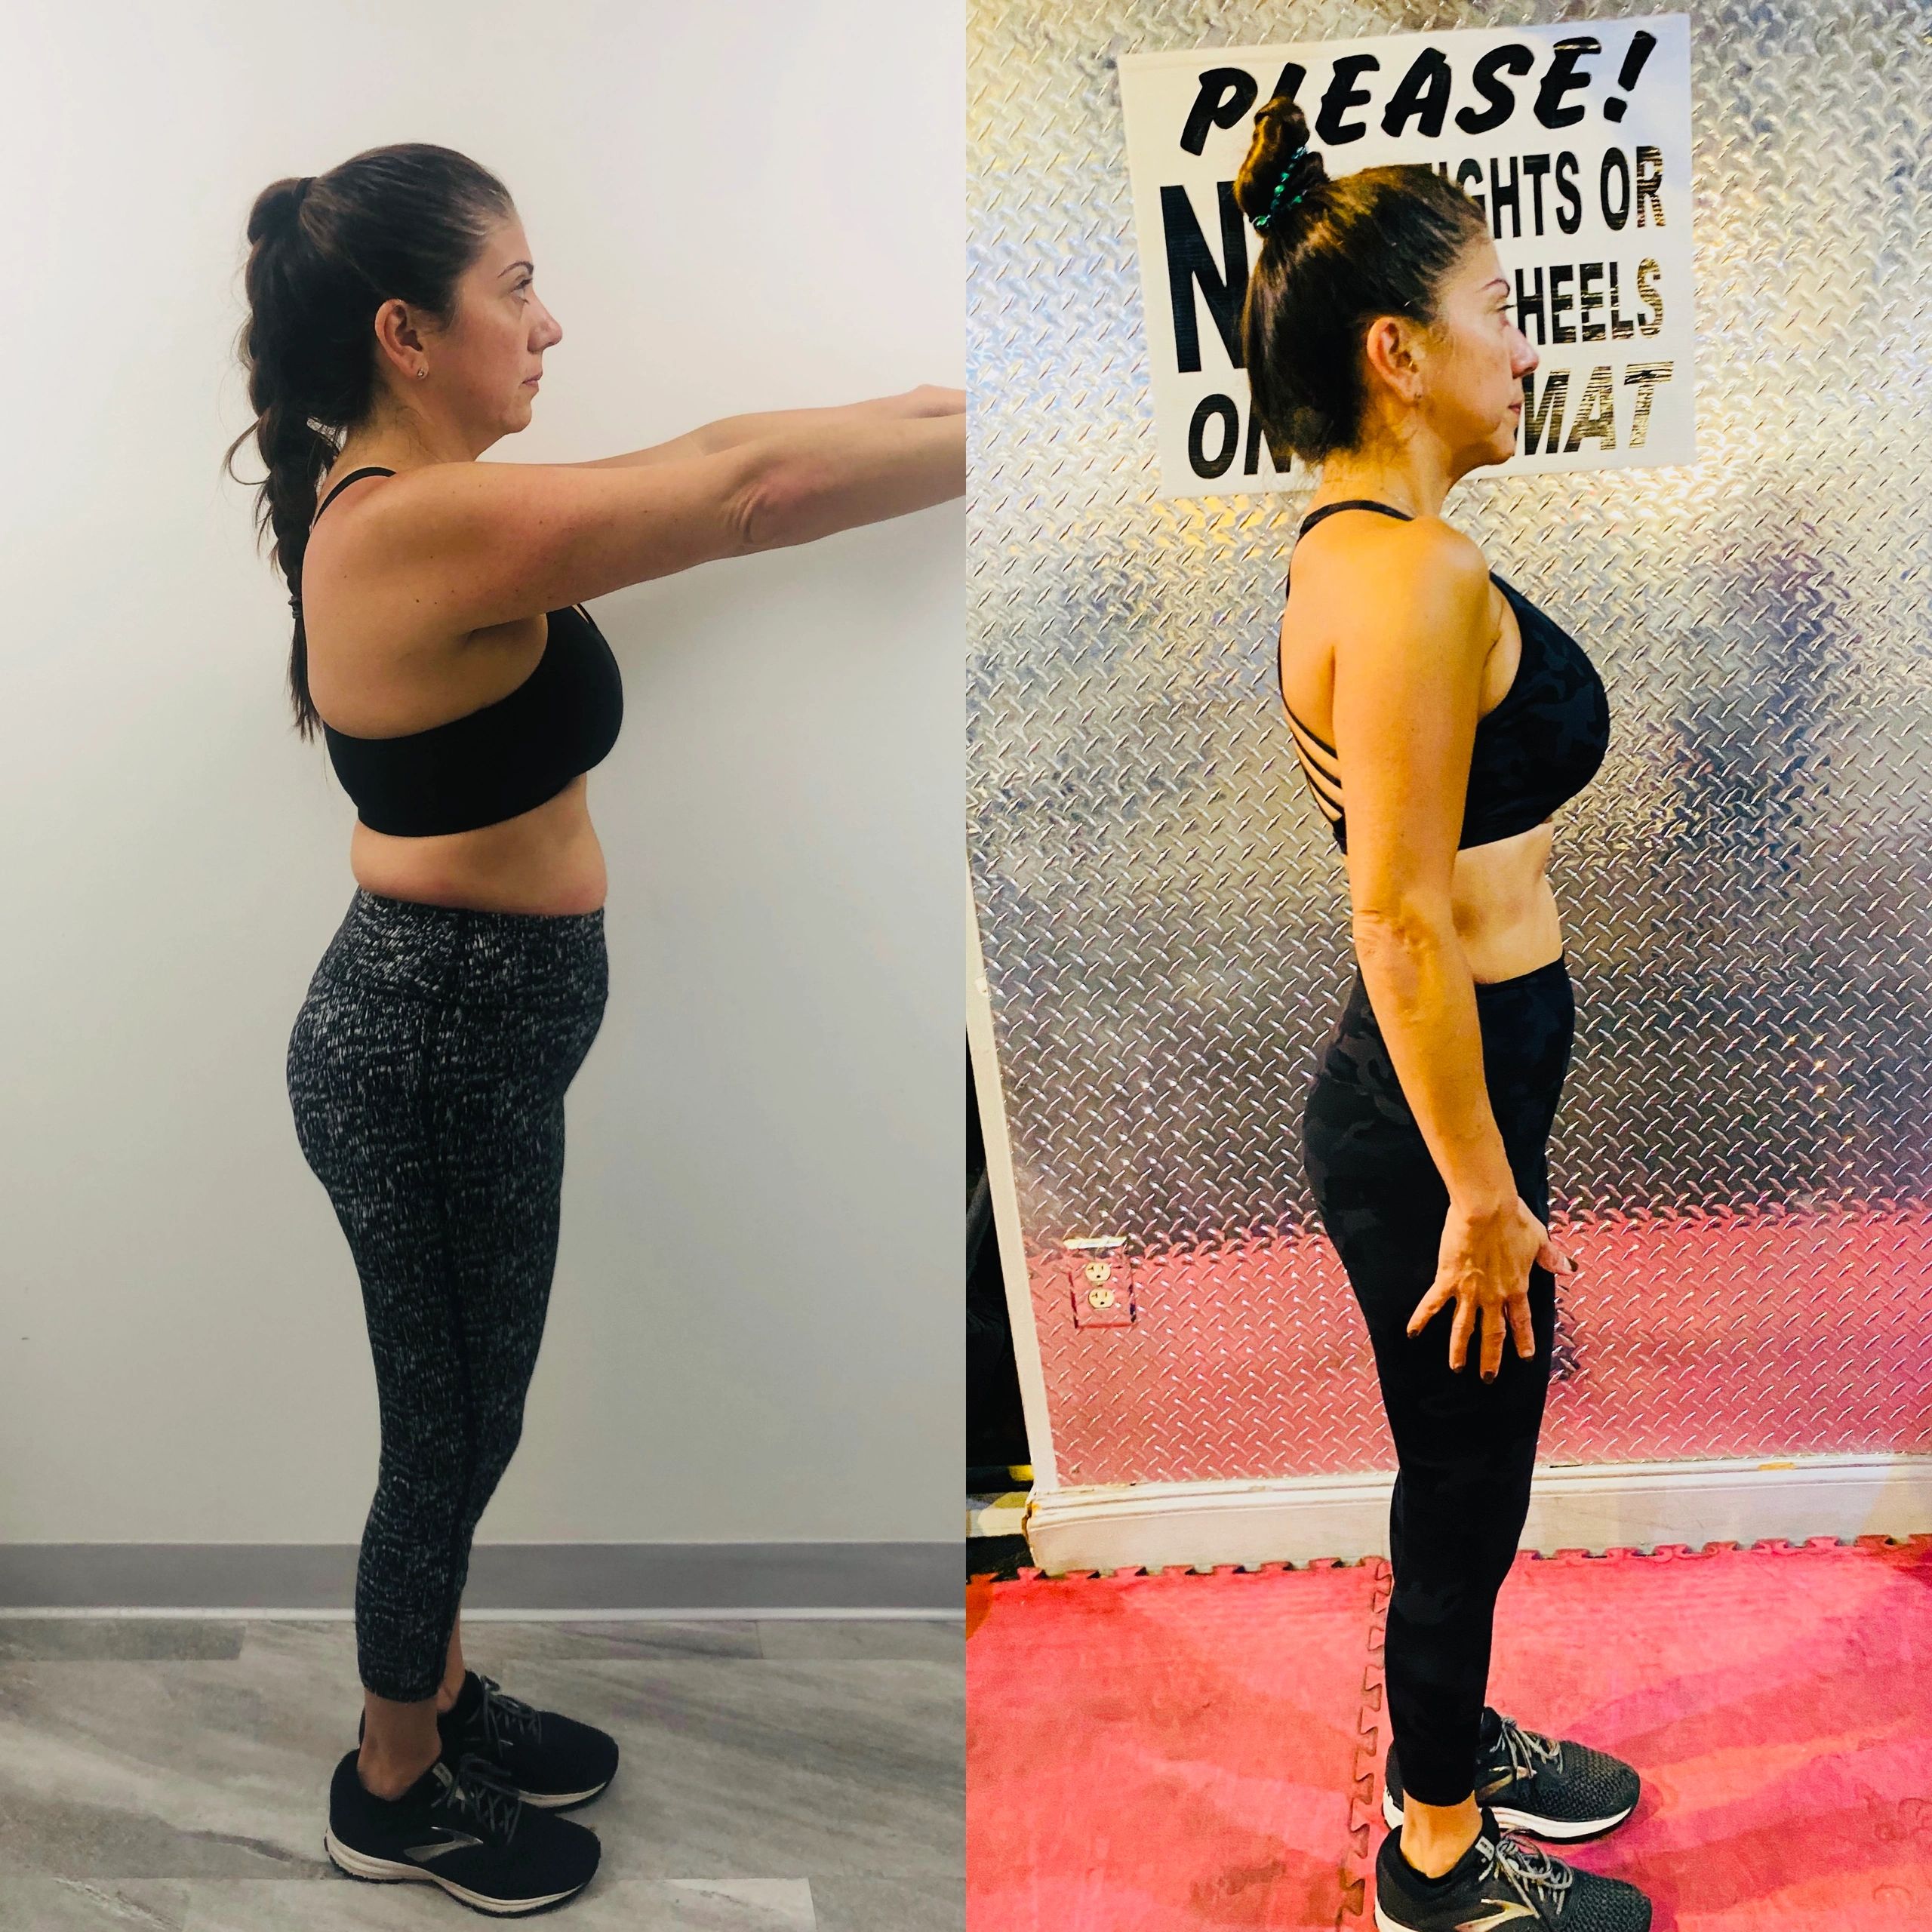 Angie's 8 week transformation.